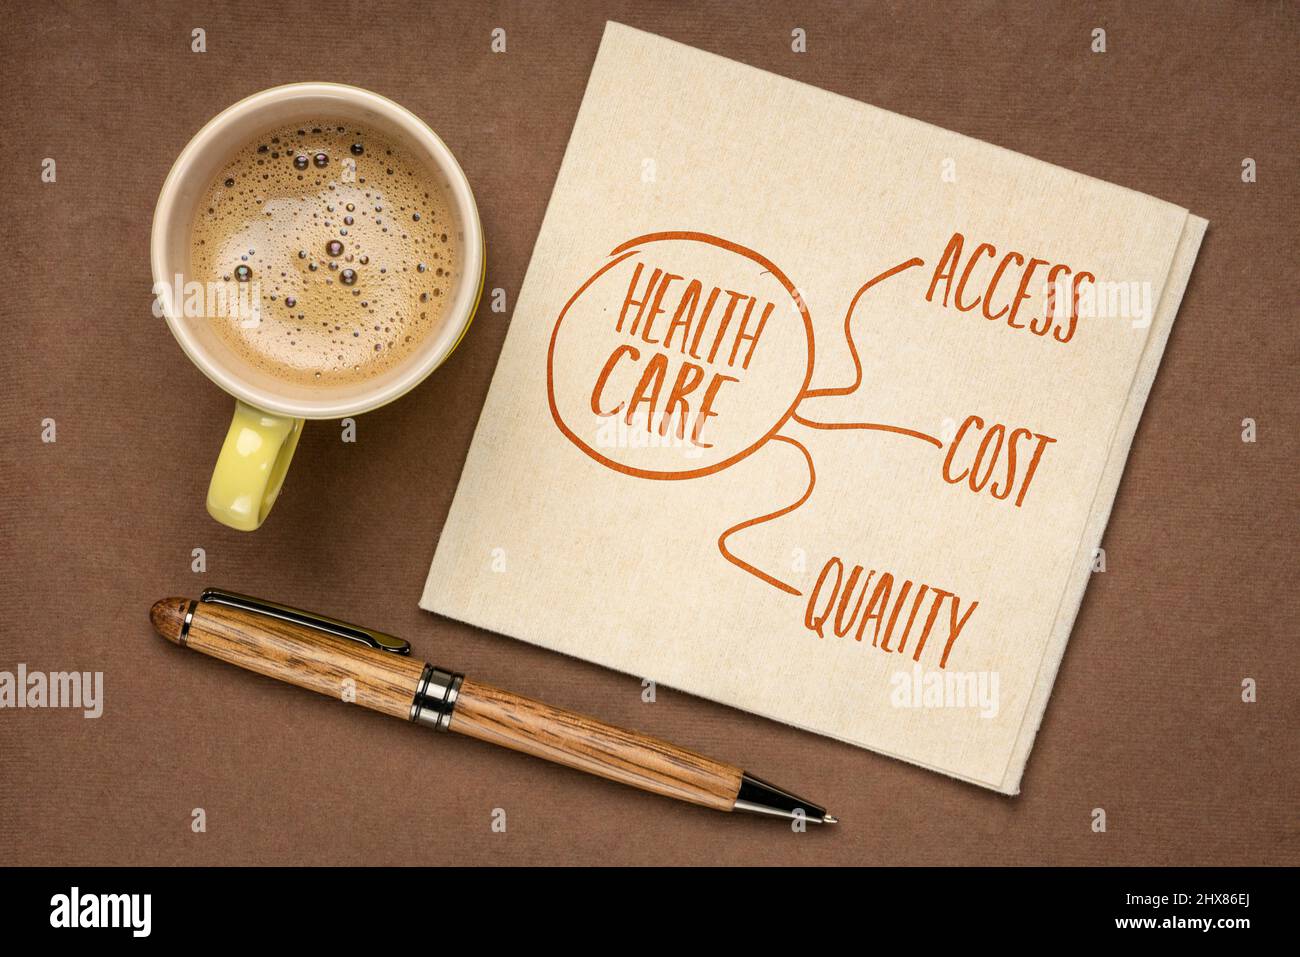 healthcare access, cost and quality concept - a sketch on a napkin with coffee, iron triangle of health care Stock Photo